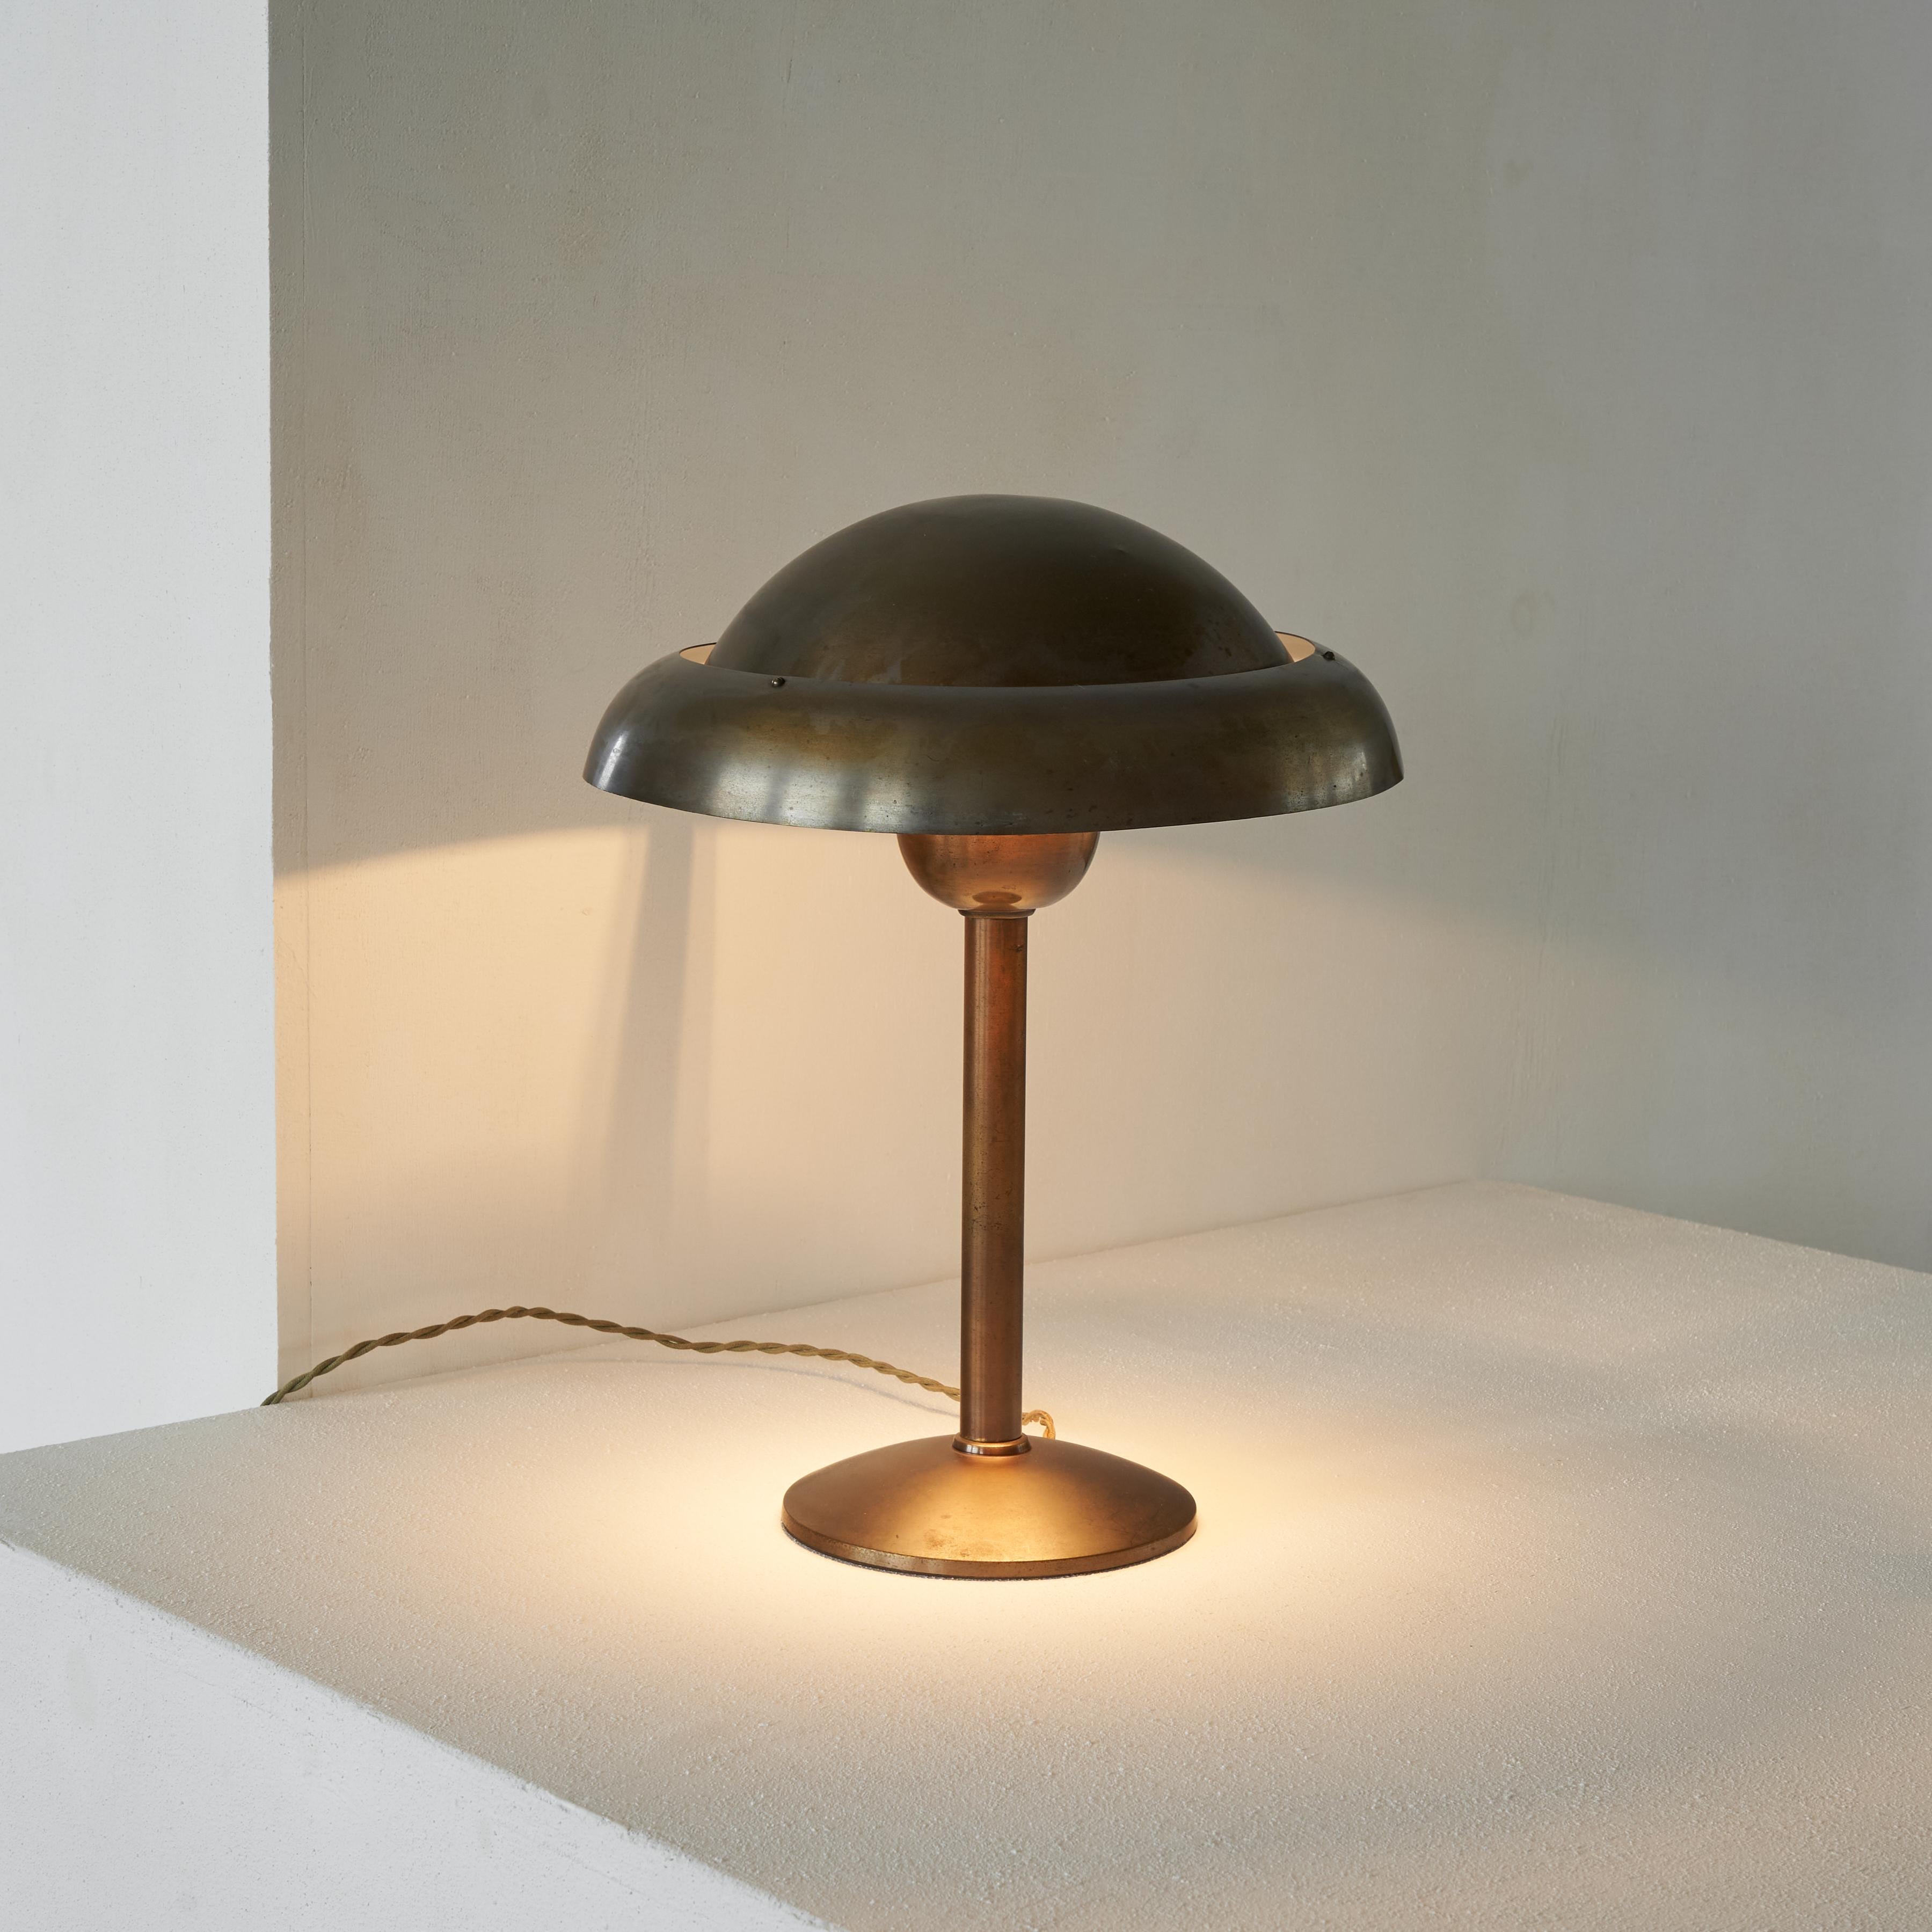 20th Century Art Deco Table Lamp in Patinated Brass